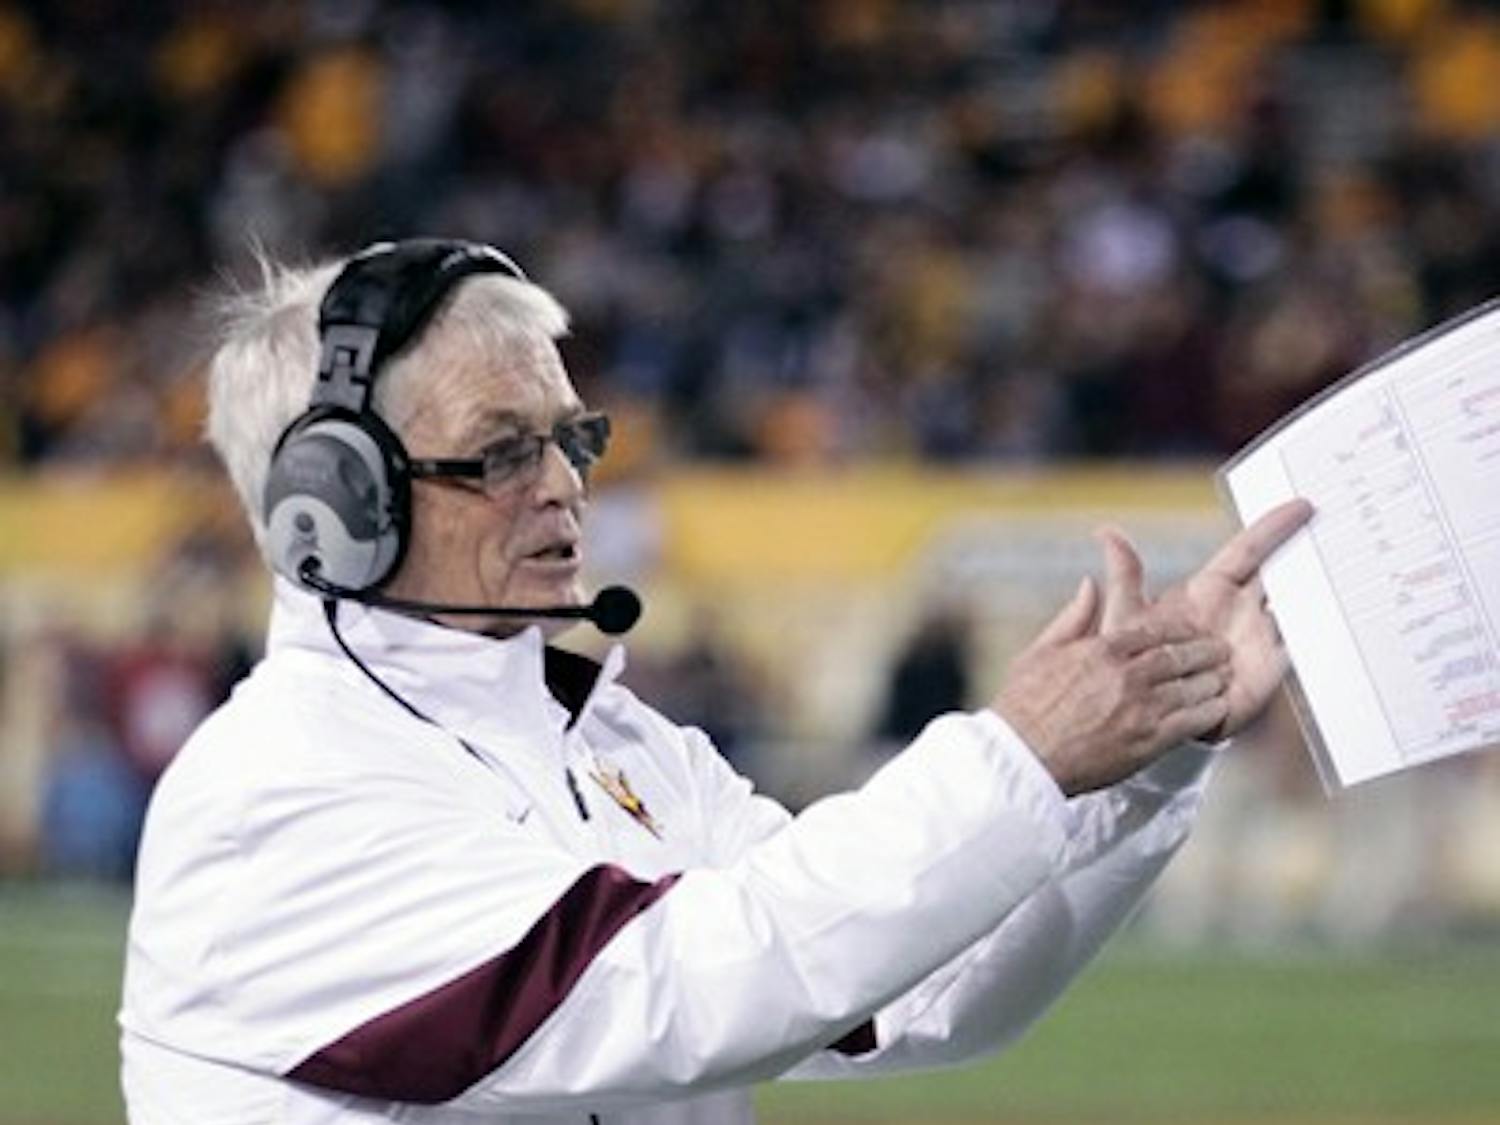 Football coach Dennis Erickson applauds on the sidelines during the Sun Devils 47-38 loss to California on Friday. Erickson said he would meet with athletic director Lisa Love sometime over the week to discuss his future with the team. (Photo by Beth Easterbrook)